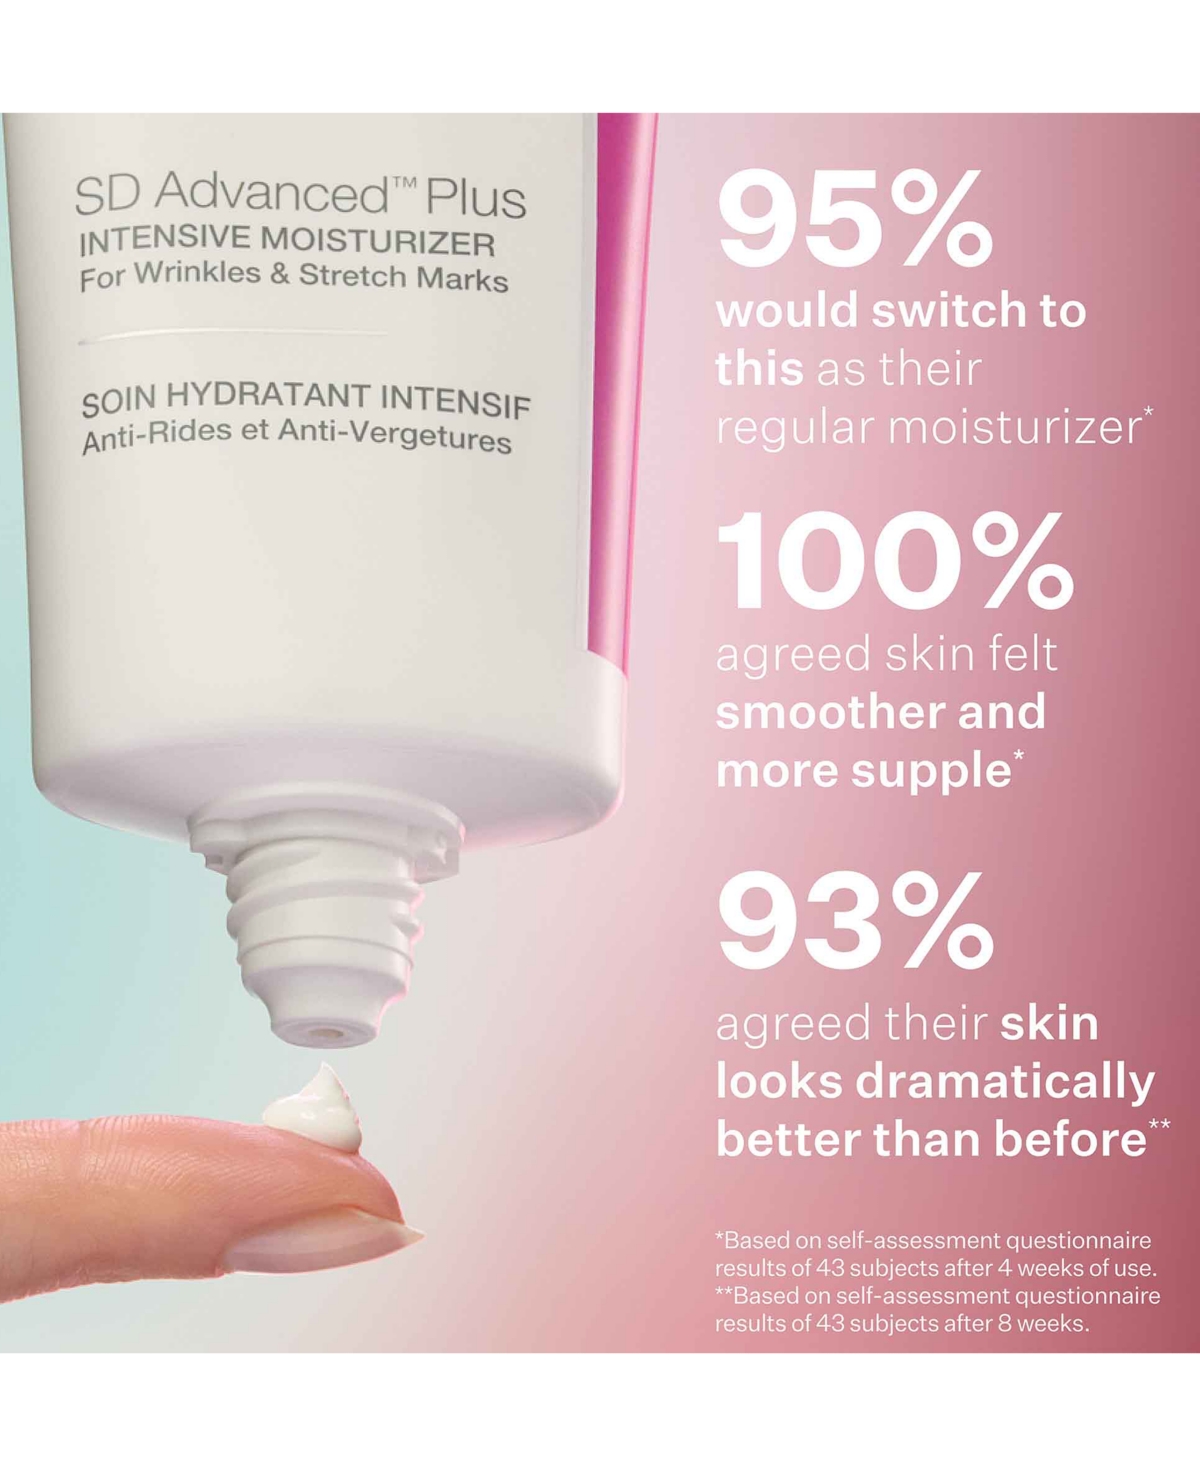 Shop Strivectin Sd Advanced Plus Intensive Moisturizer For Wrinkles & Stretch Marks, 4 Oz. In No Color